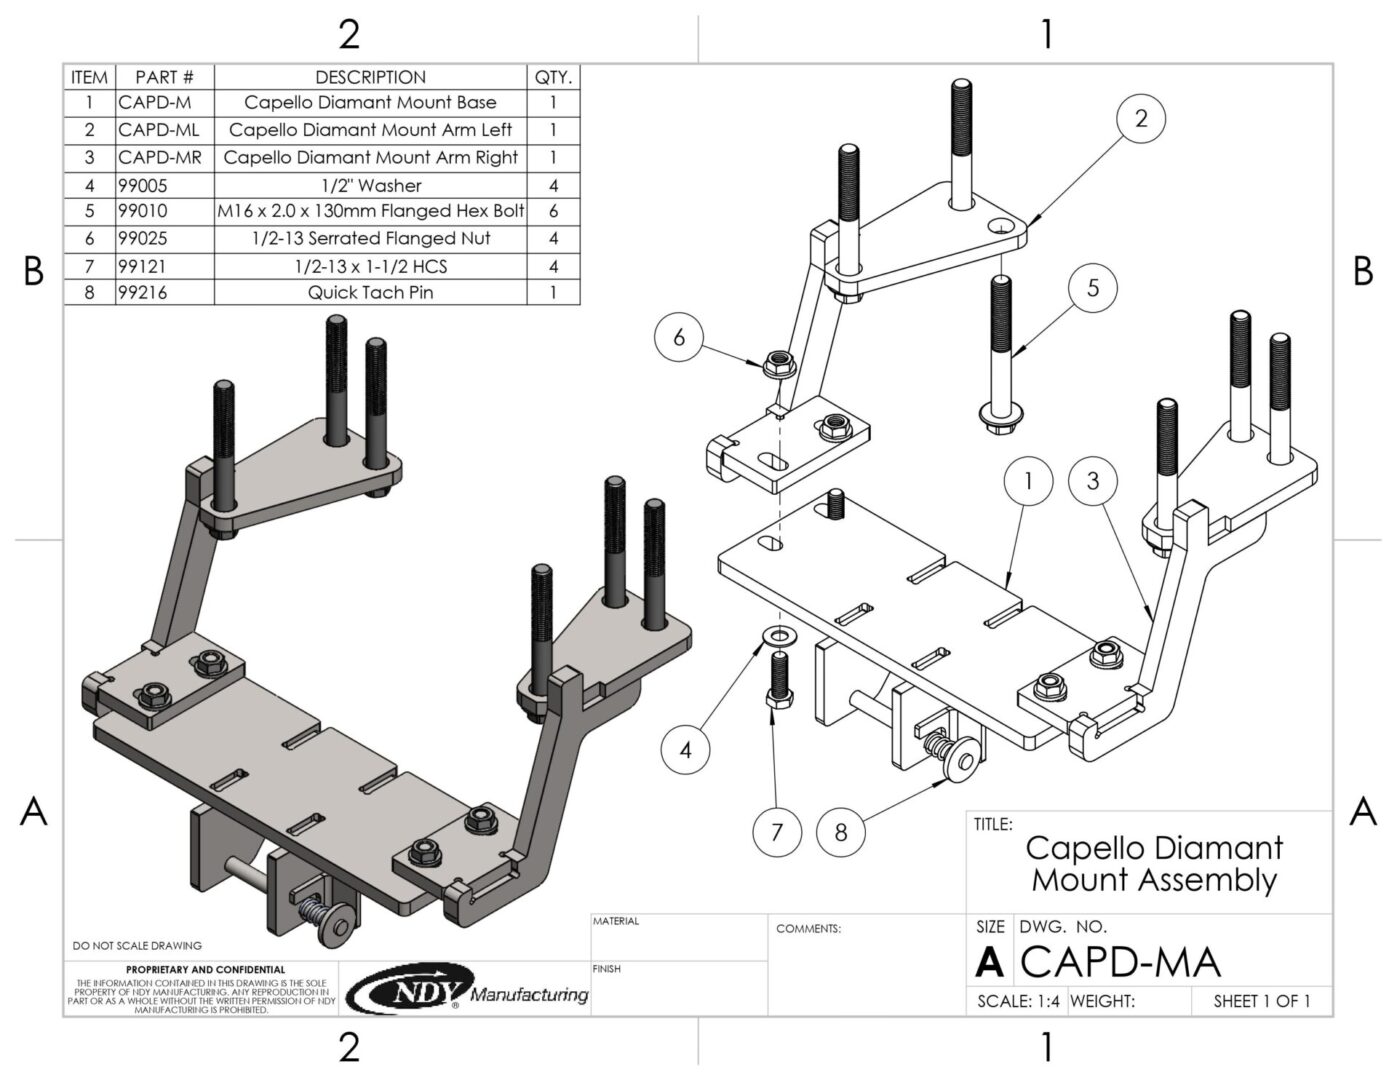 A diagram showing the parts of a Stalk Stomper Universal Mount Assembly for Capello Diamant Corn Head.